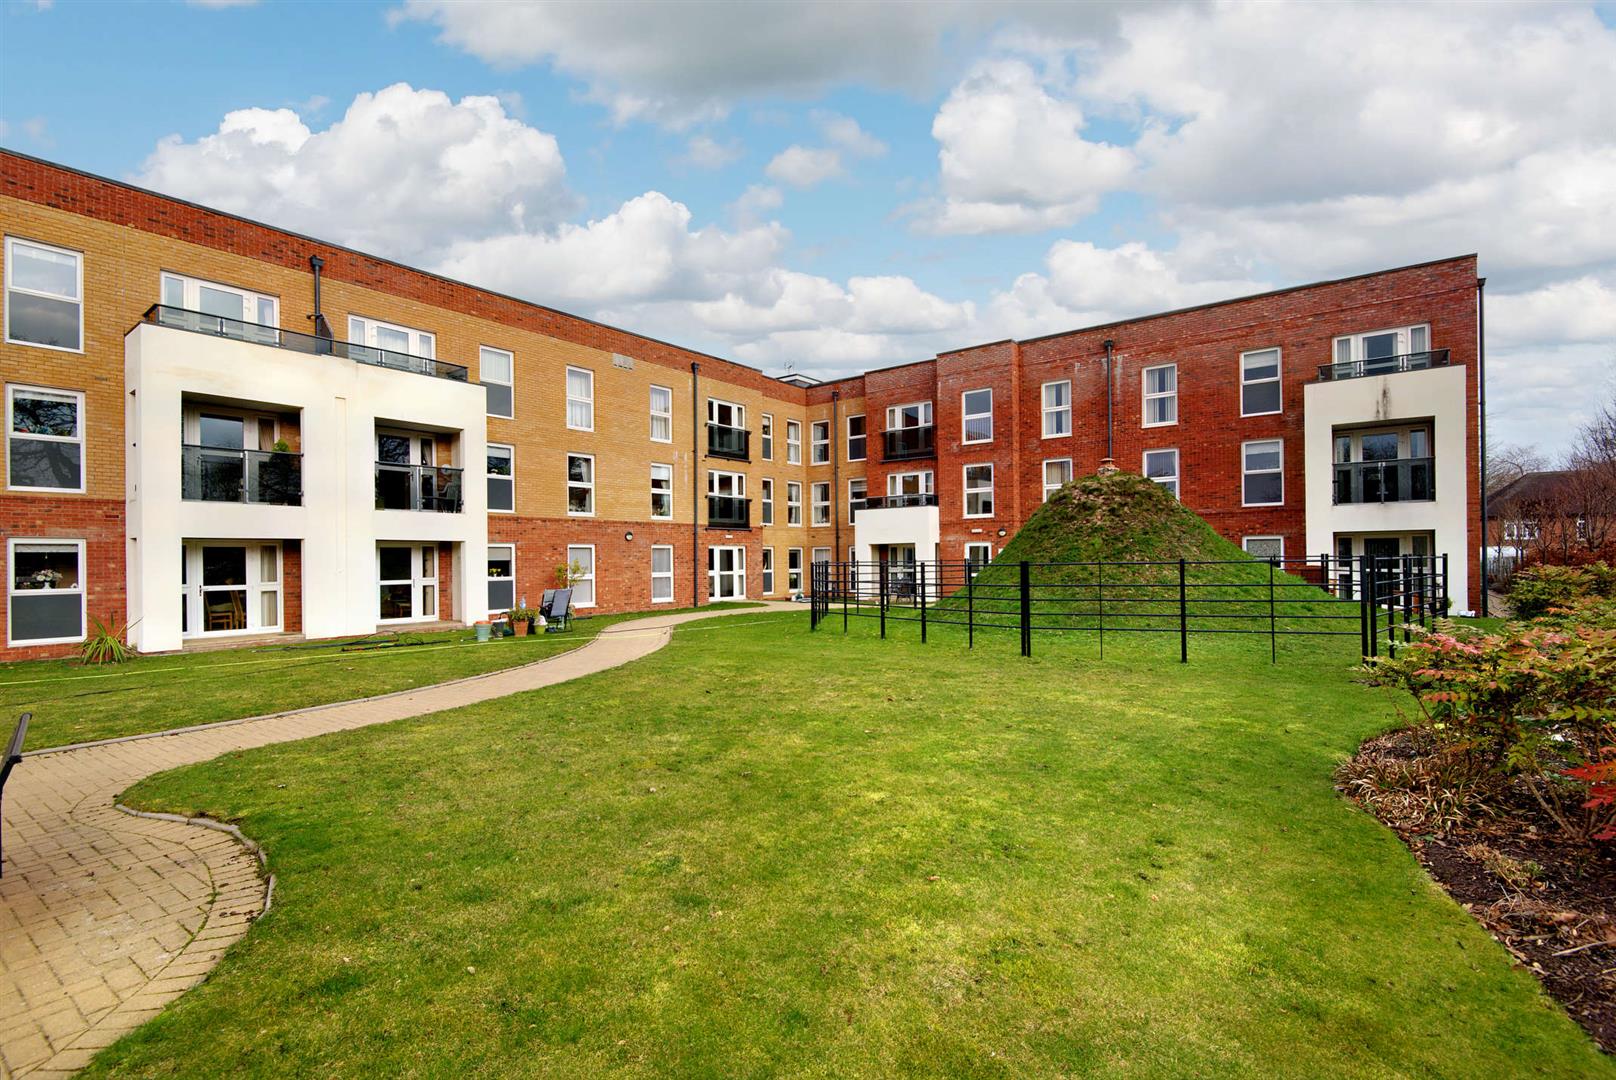 Humphrey Court, The Oval, Stafford, Staffordshire, ST17 4SD